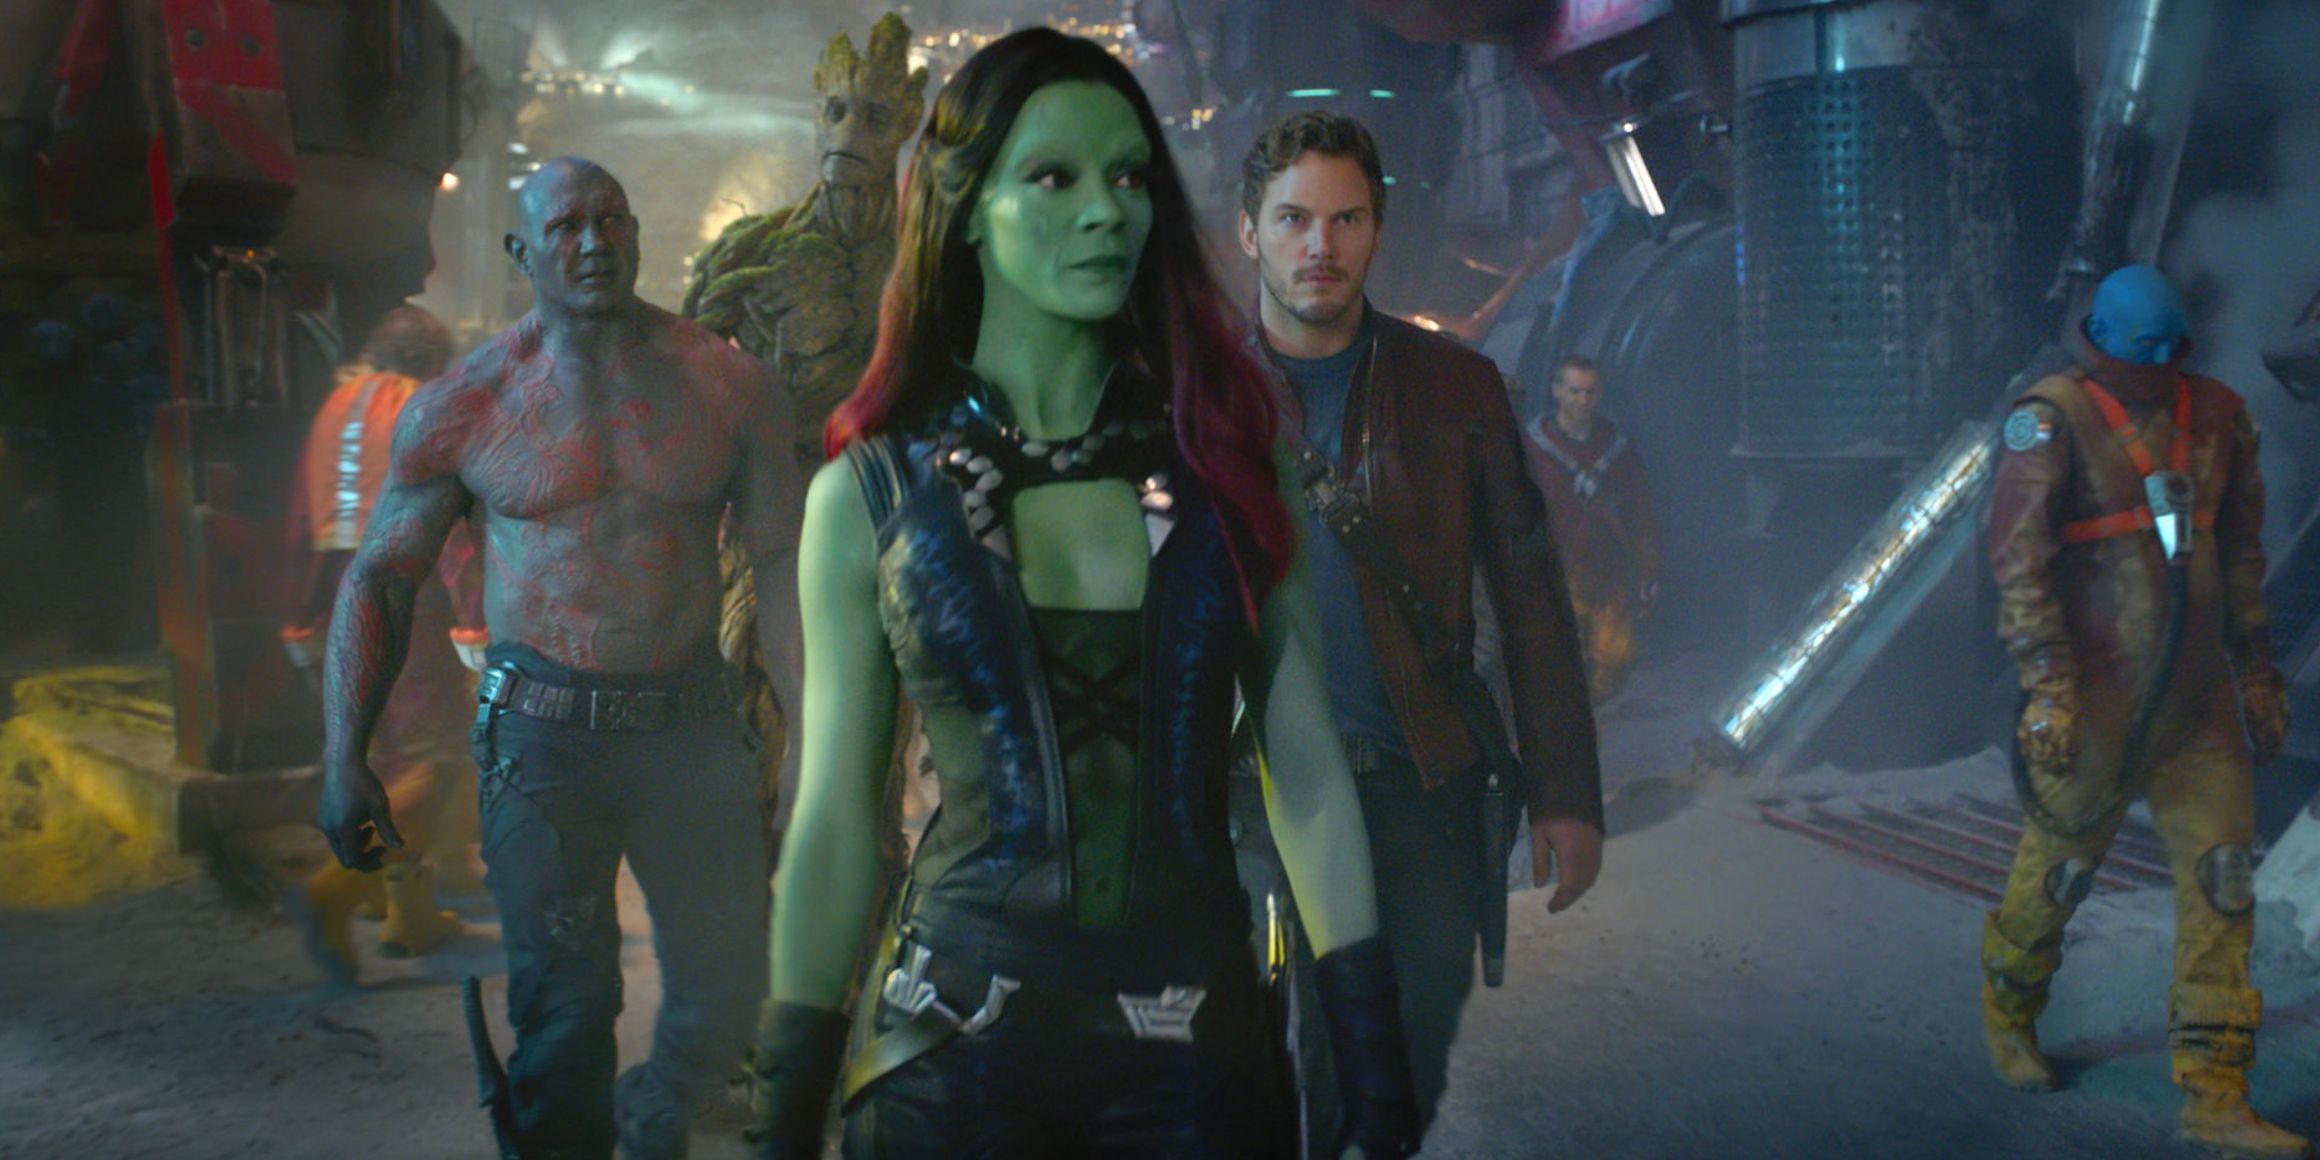 Gamora leads the Guardians through the streets of Knowhere in Guardians of the Galaxy Vol 1